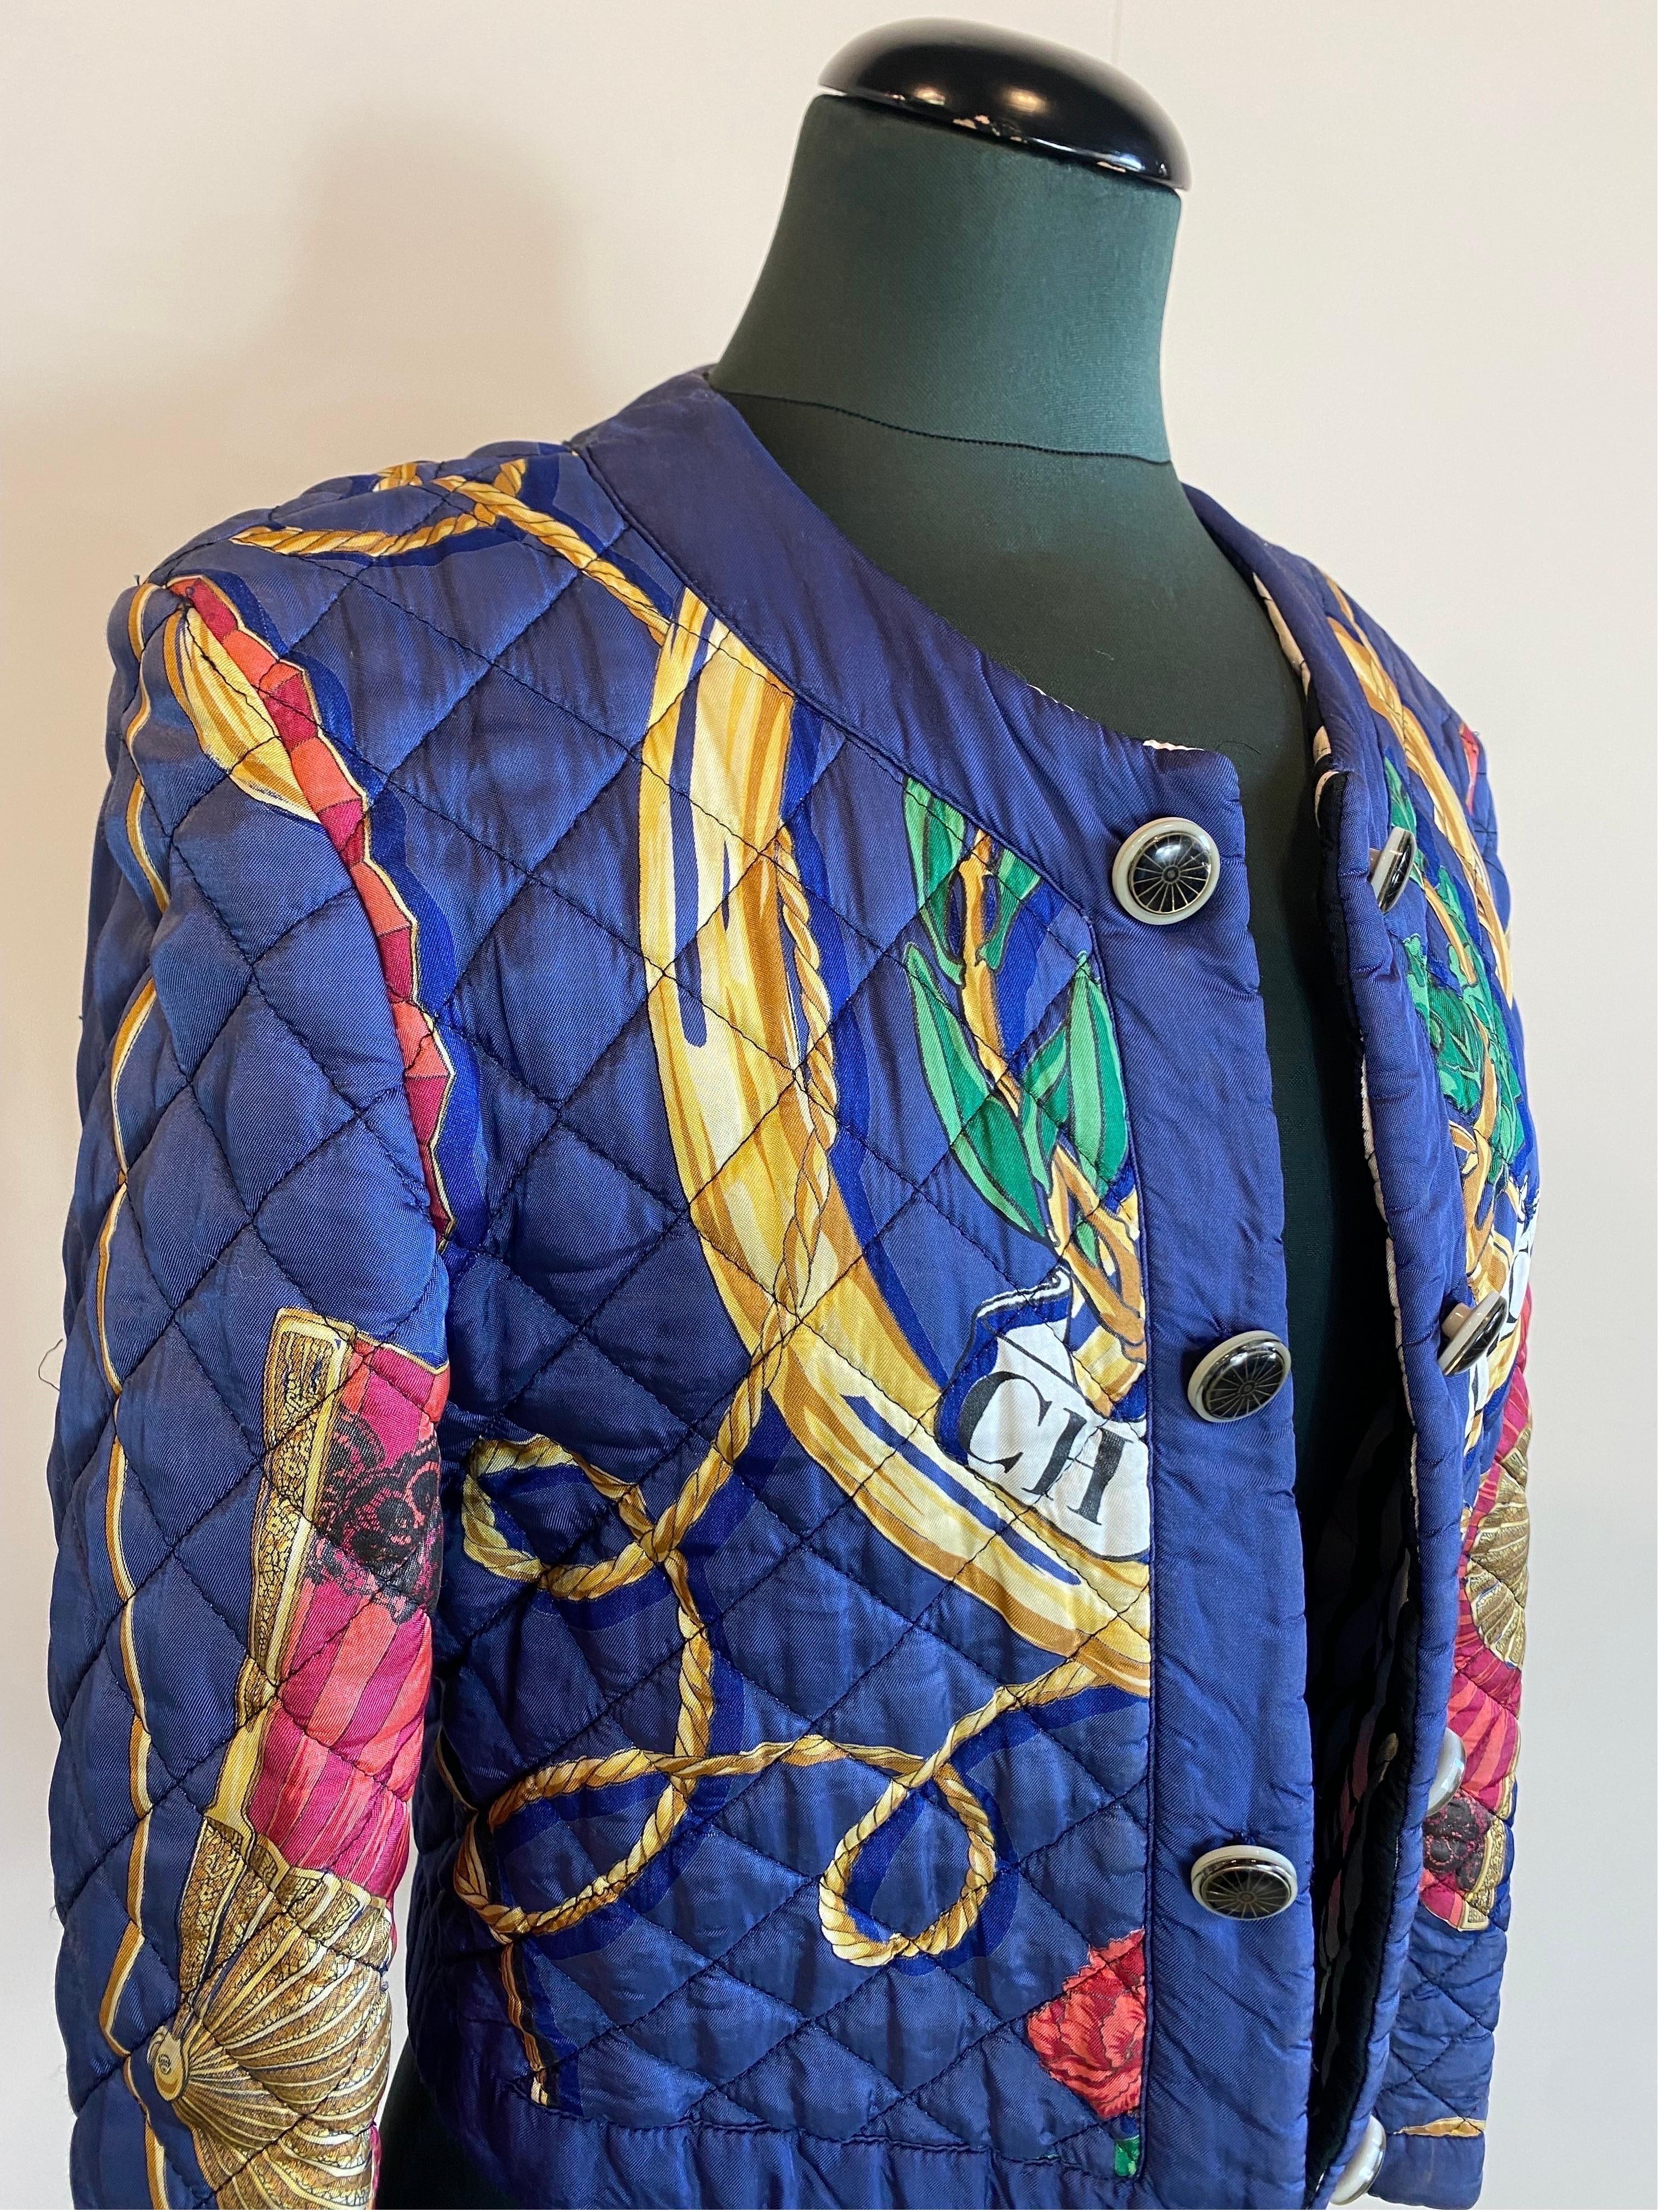 Rare vintage golden patterned jacket.
In Rayon.
Buttons for aesthetic purposes only. Quilted.
Size 42.
Length 45
Sleeve length 58
Bust 47
In good condition, shows signs of normal use as shown in the photos. in some places the seams of the quilt are